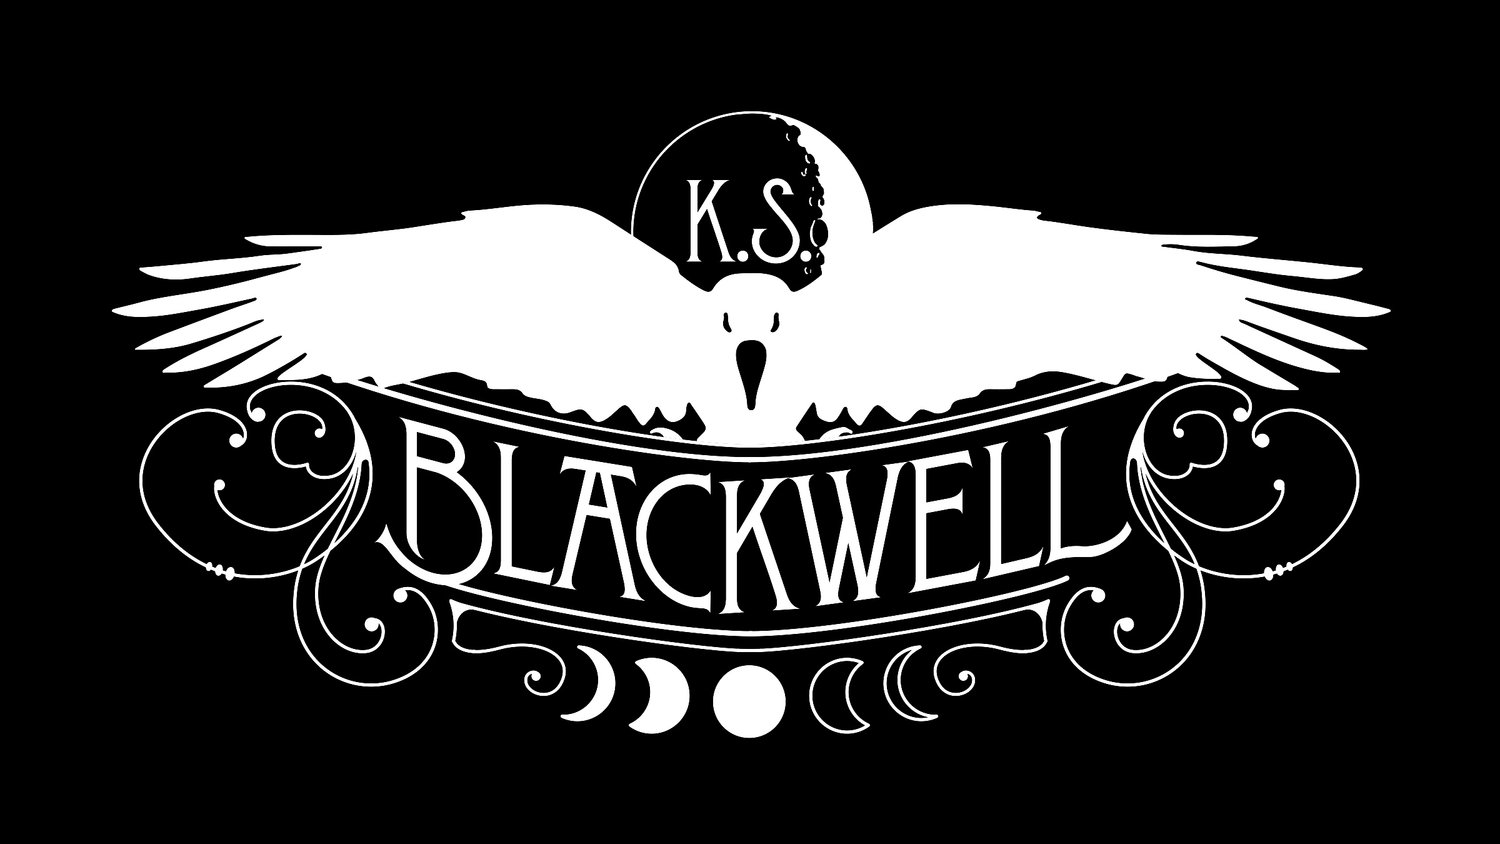 Keith S. Blackwell